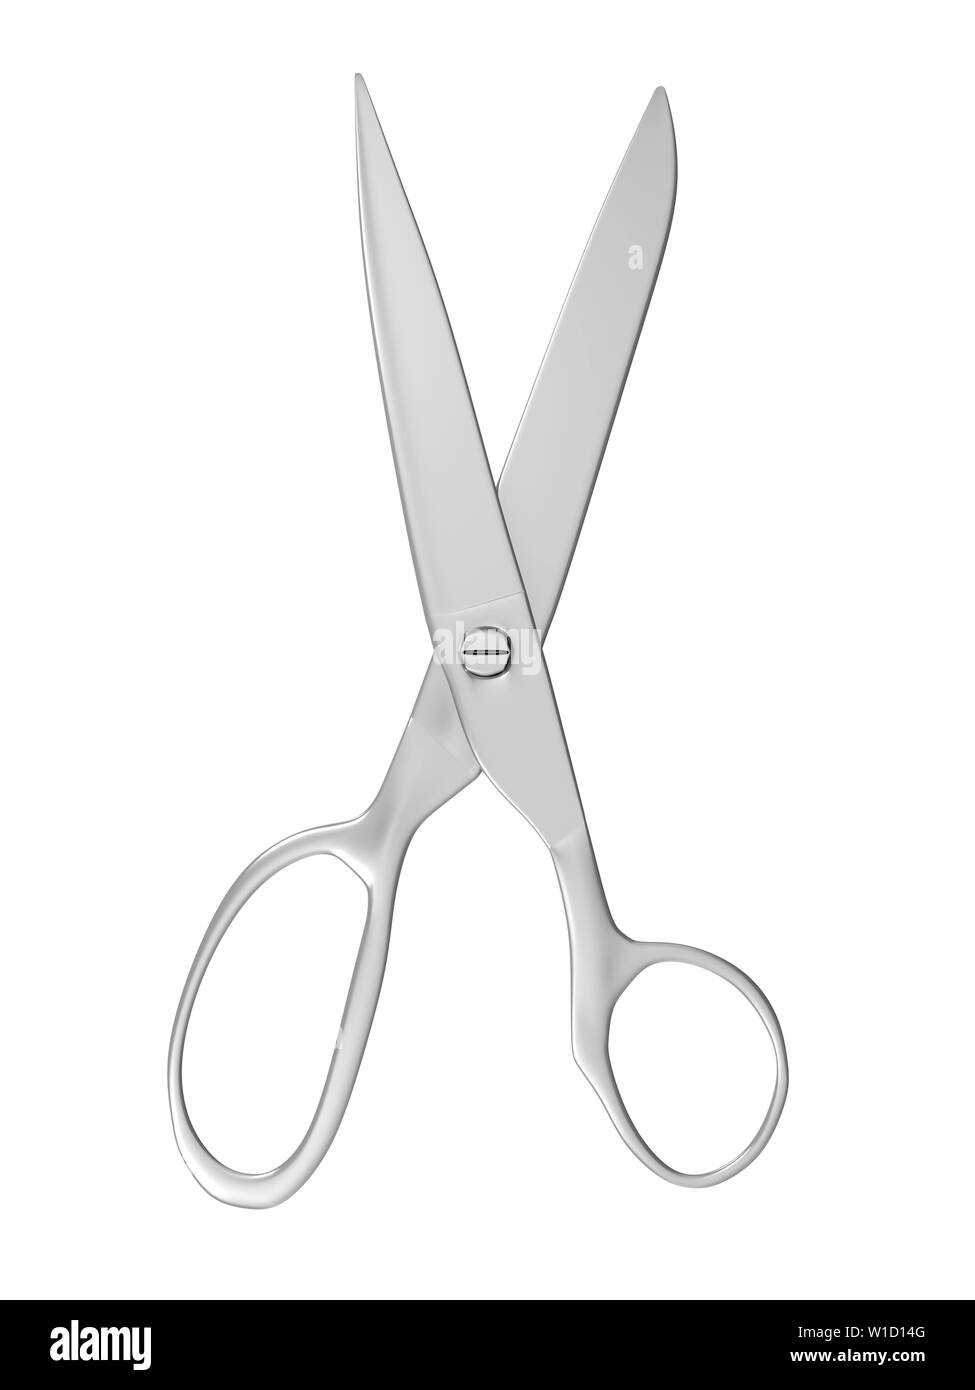 scissors for trimming fishing line isolated on white background Stock Photo  - Alamy